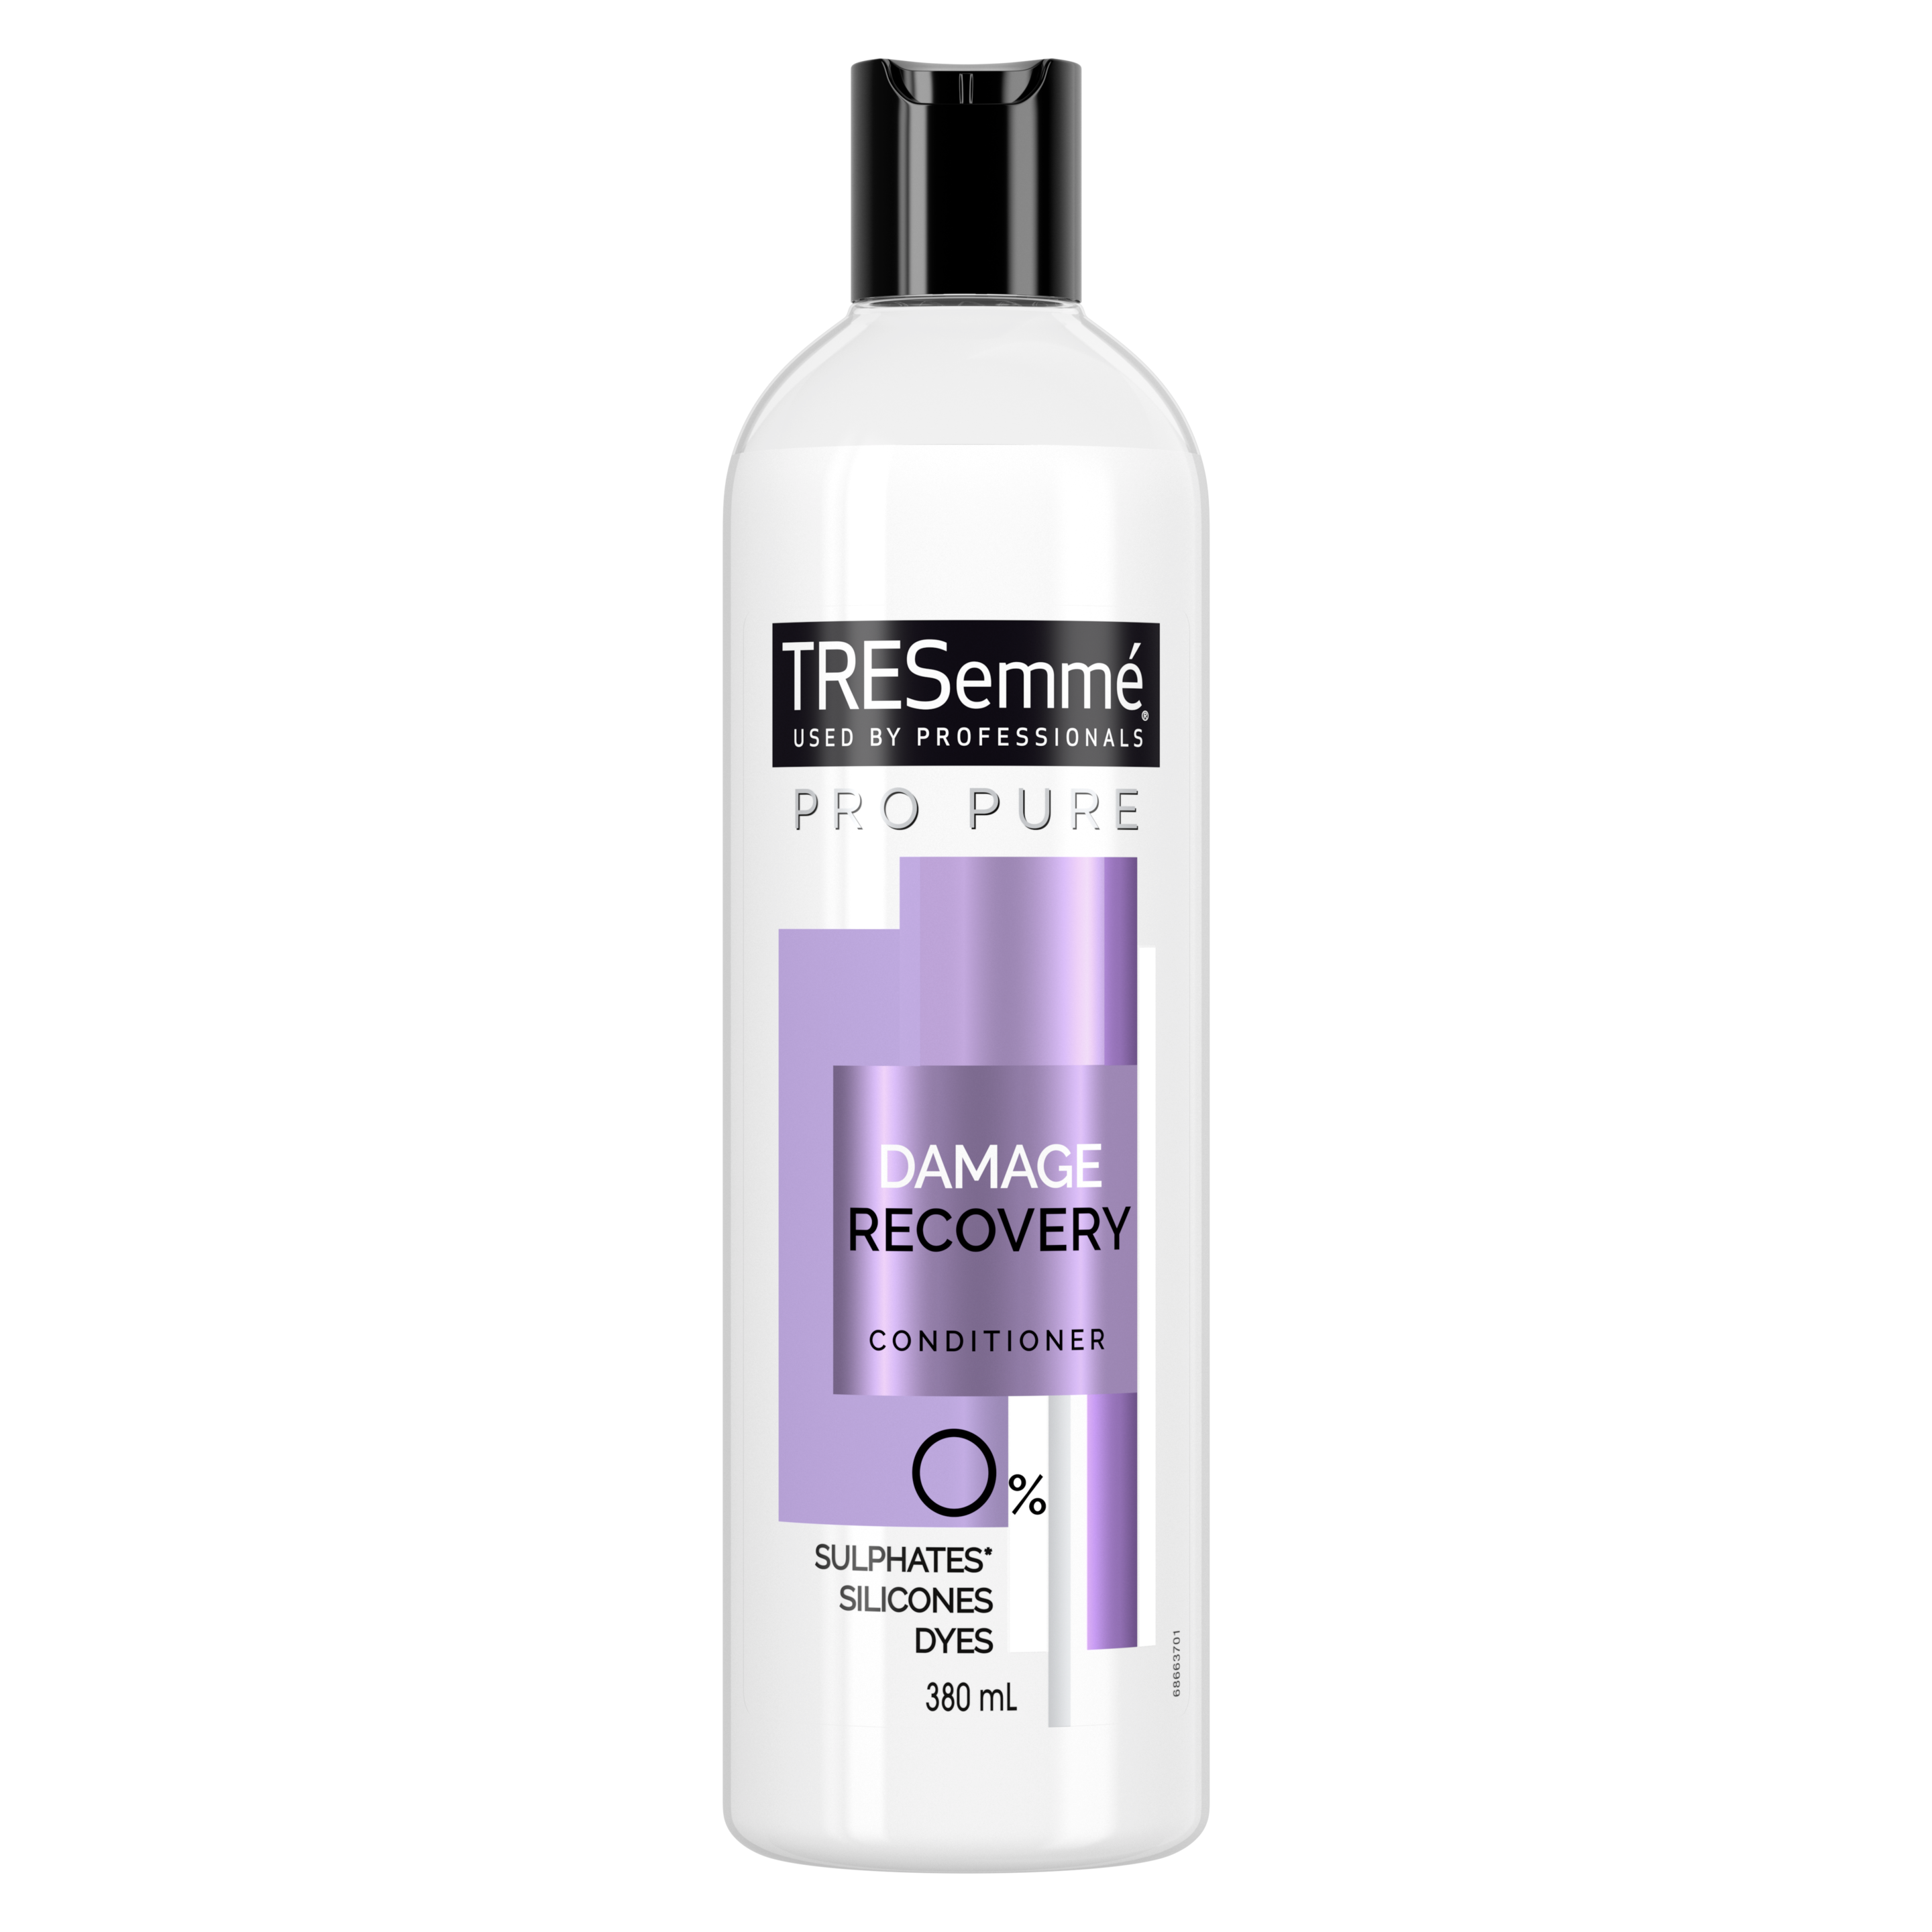 Pro Pure Damage Recovery Conditioner